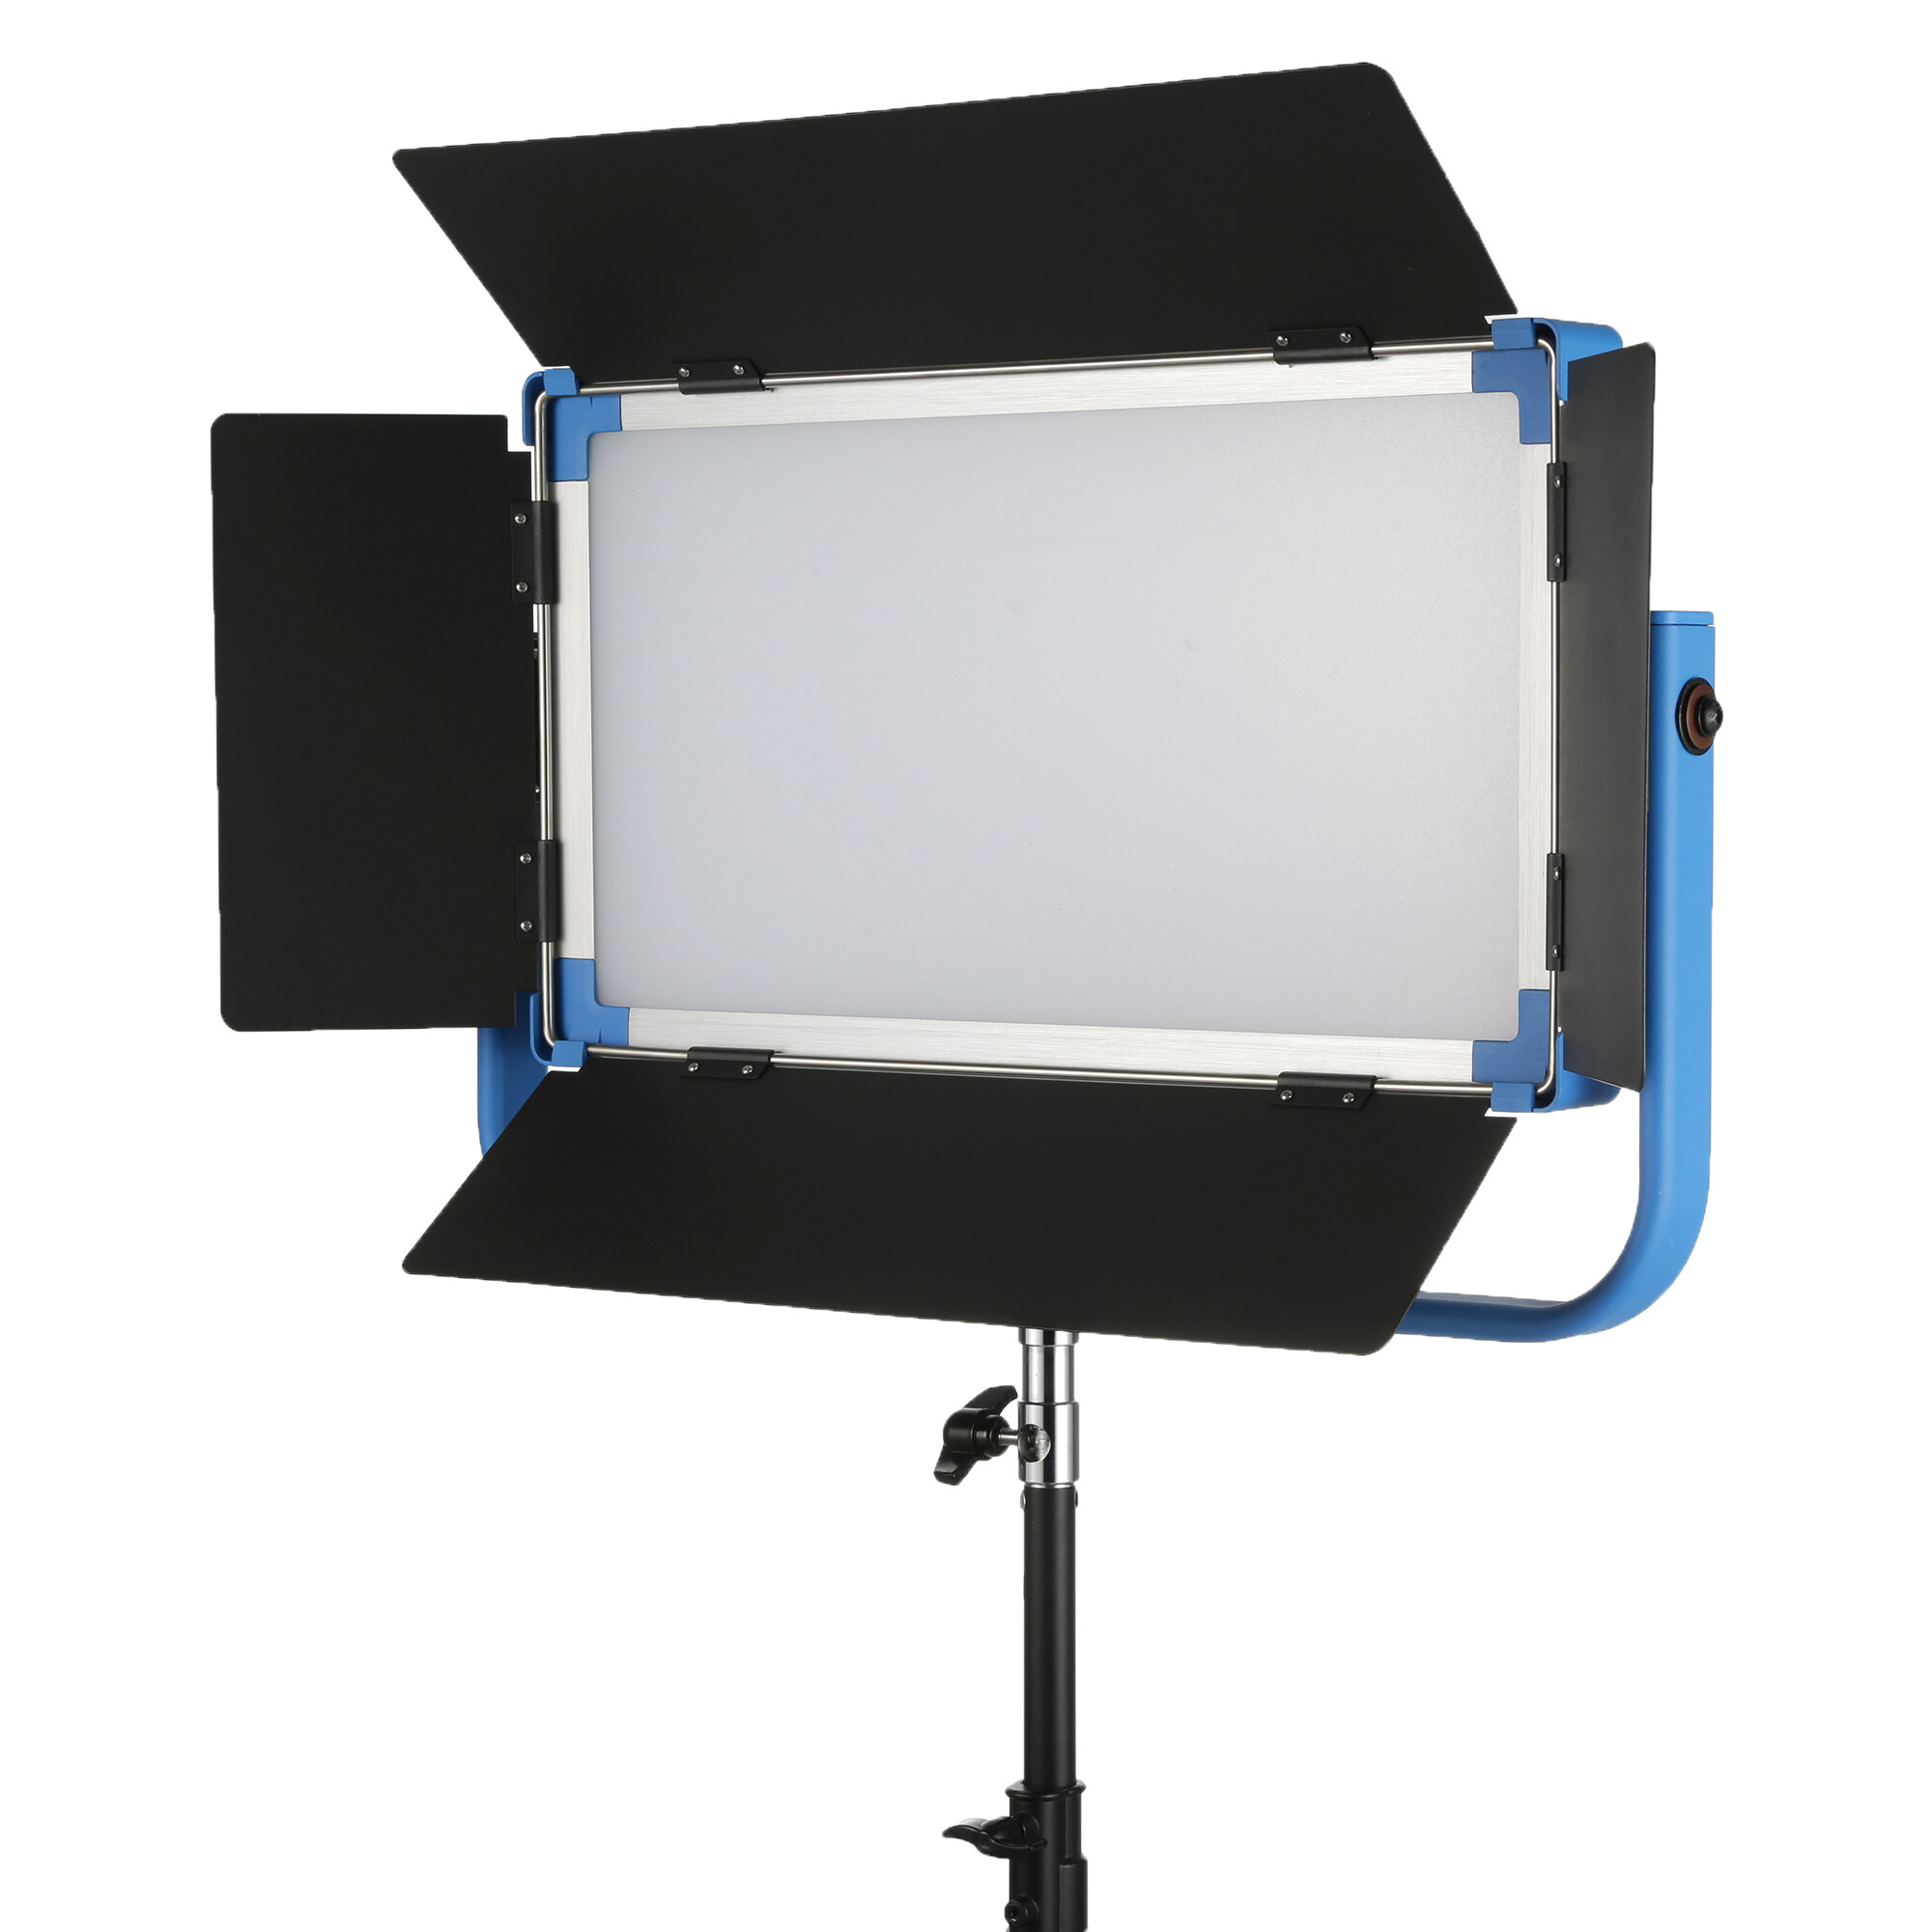 LS 120W HUESCAPE HS-120 RGB+W LED Panel Light for Photography and Video Shooting